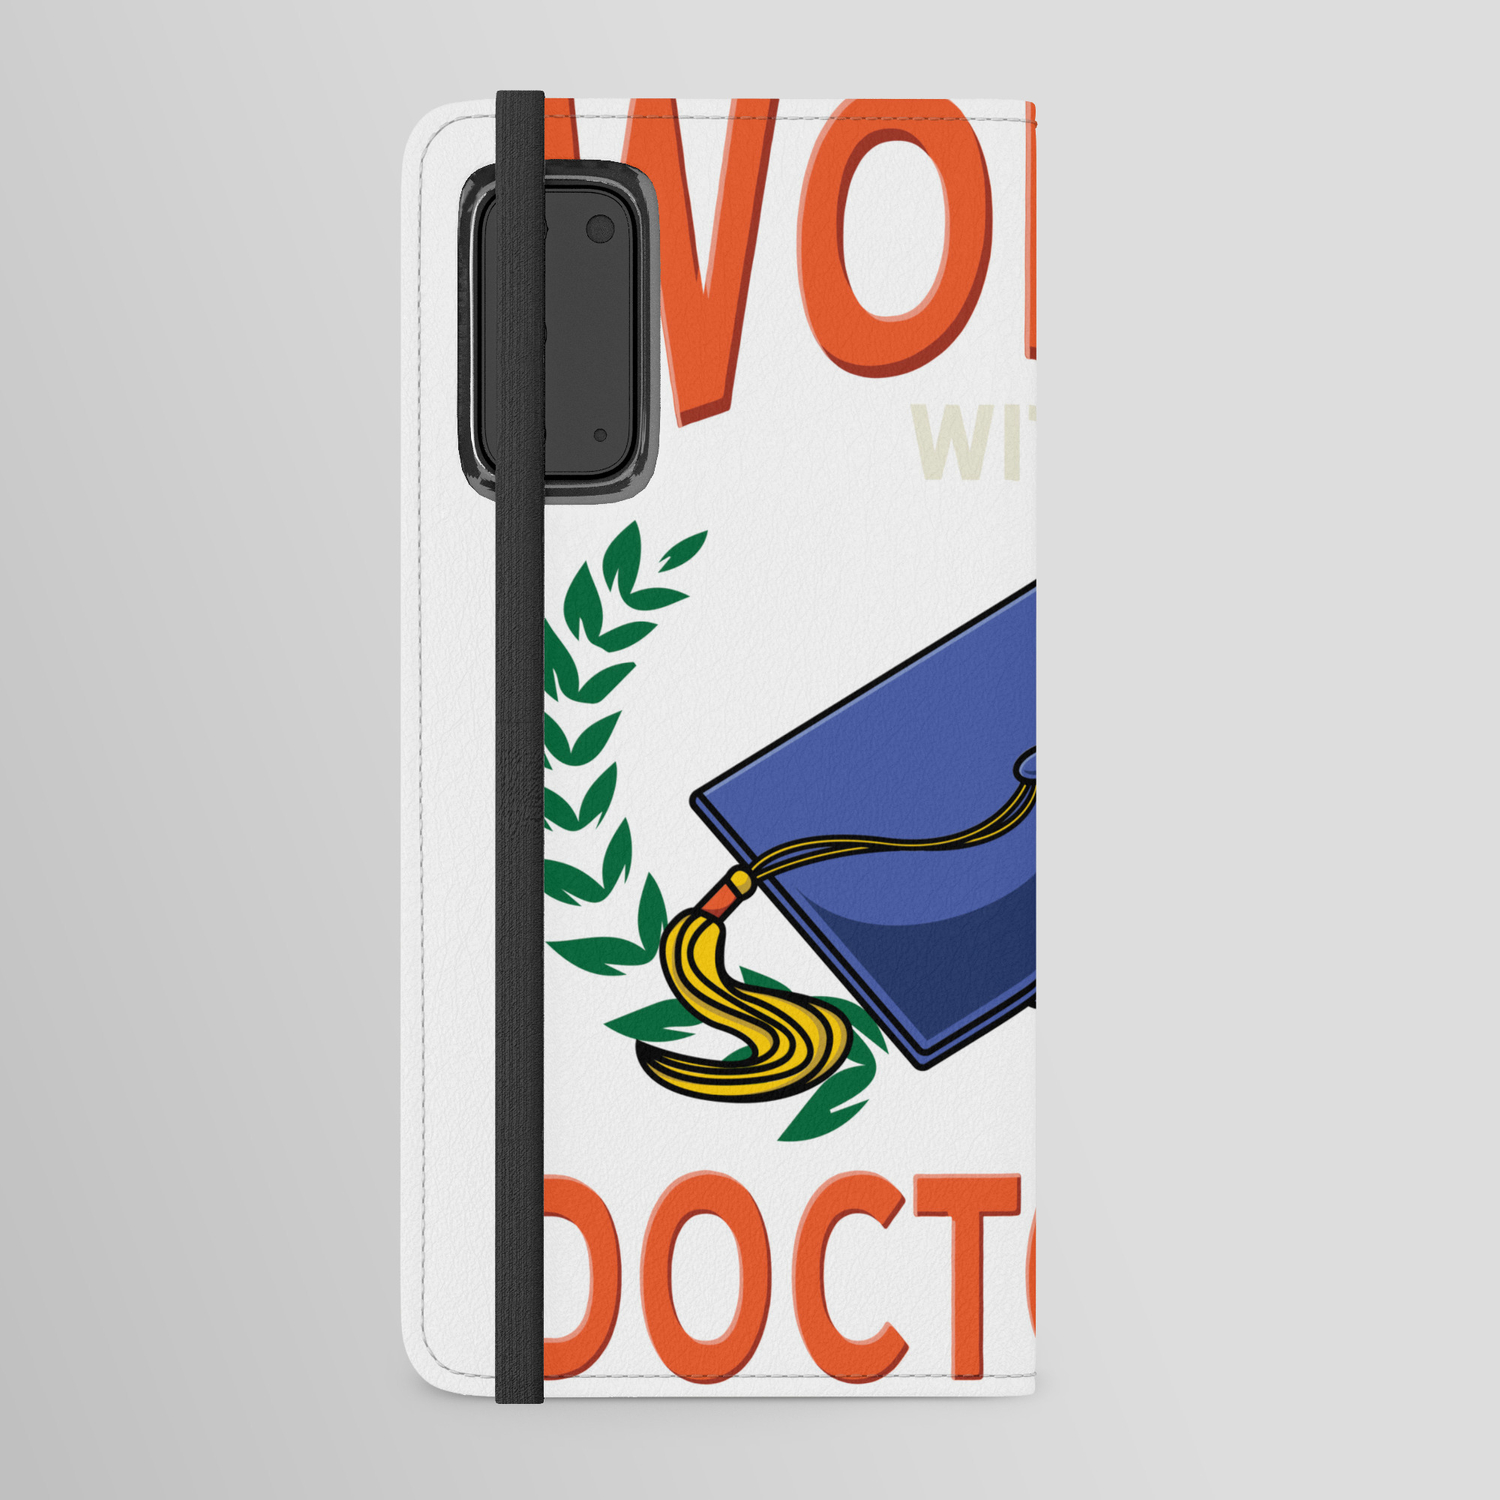 Women Doctoral Degree Gift - Funny PhD Graduation Gift Android Wallet Case  by stefanart | Society6